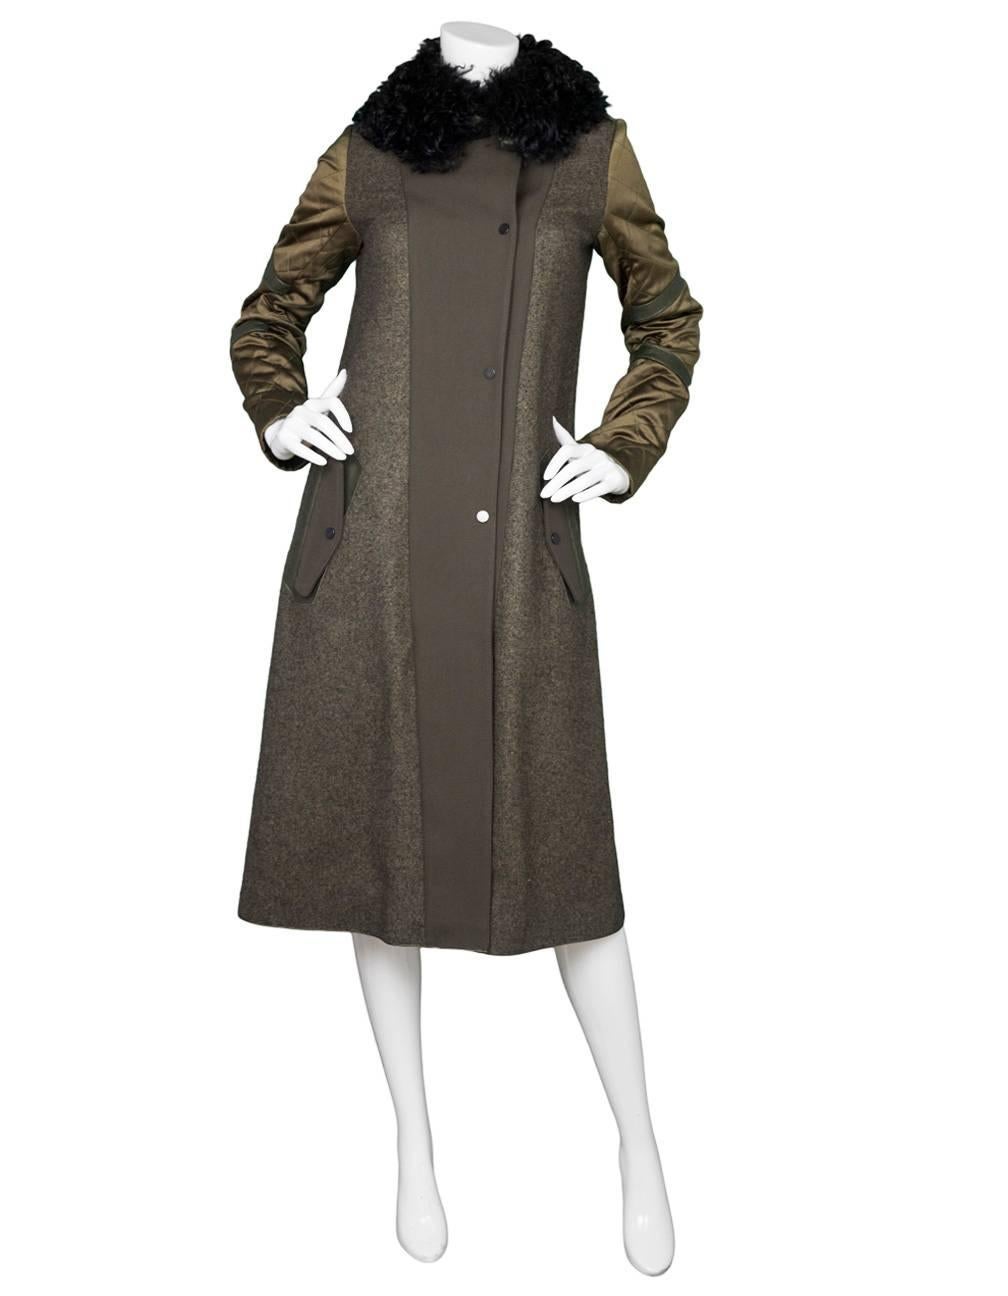 Belstaff Wool Coat & Curly Lamb Fur Coat Sz IT38
Features leather trim

Made In: Italy
Color: Brown
Composition: 80% wool, 20% nylon
Lining: None
Closure/Opening: Front button closure
Exterior Pockets: Two hip flap pockets
Interior Pockets: